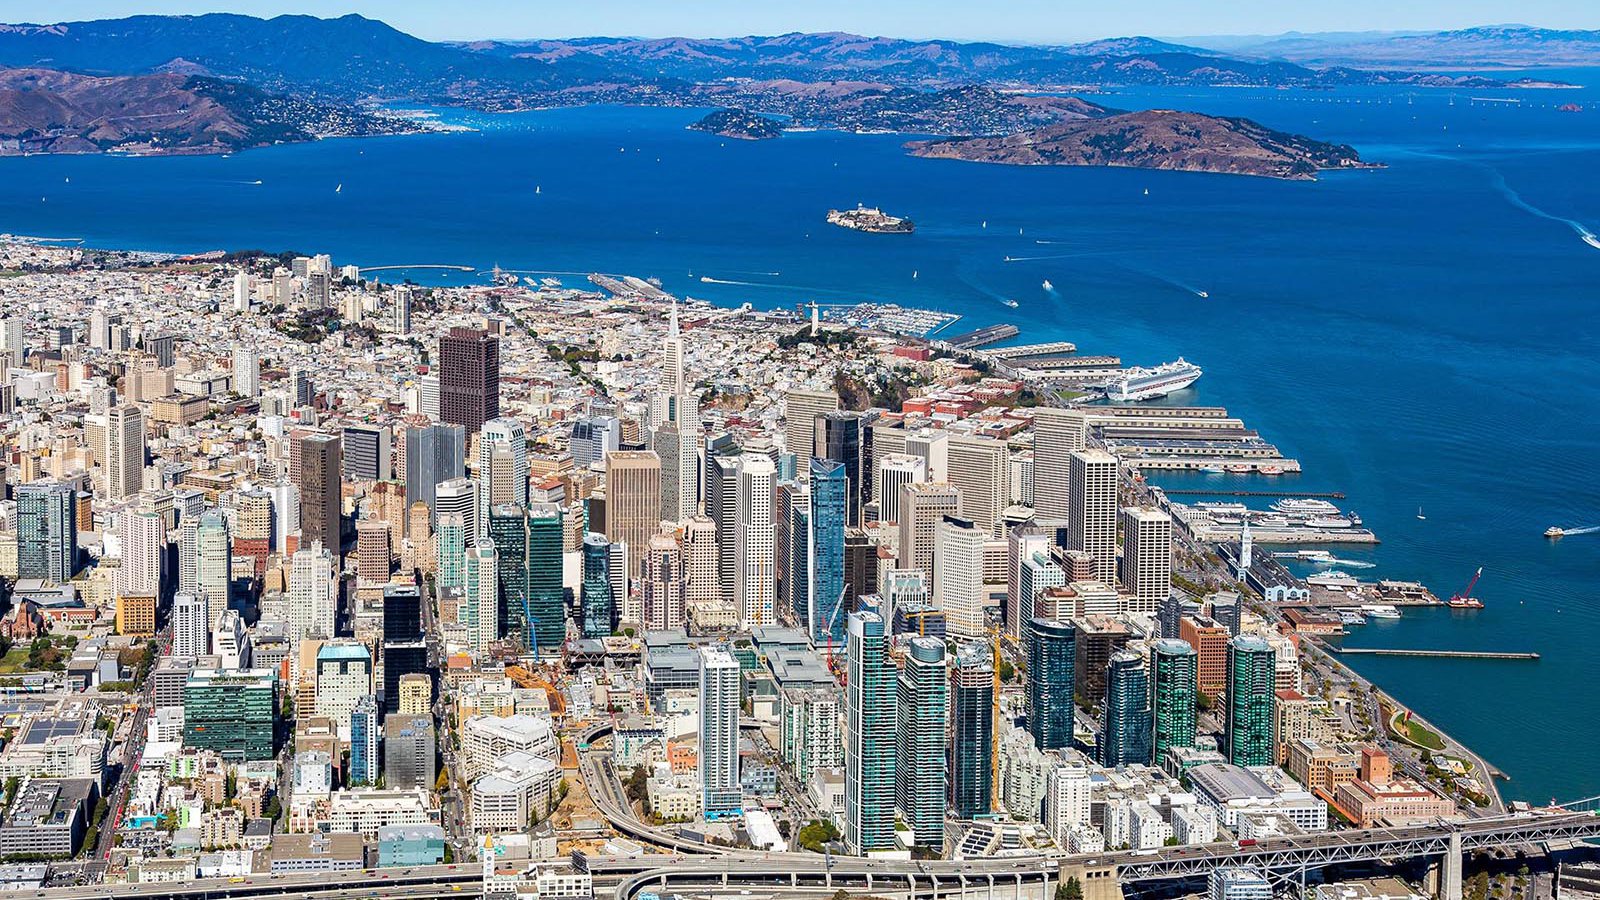 Aerial cityscape of Downtown San Francisco with Alcatraz Island in the background